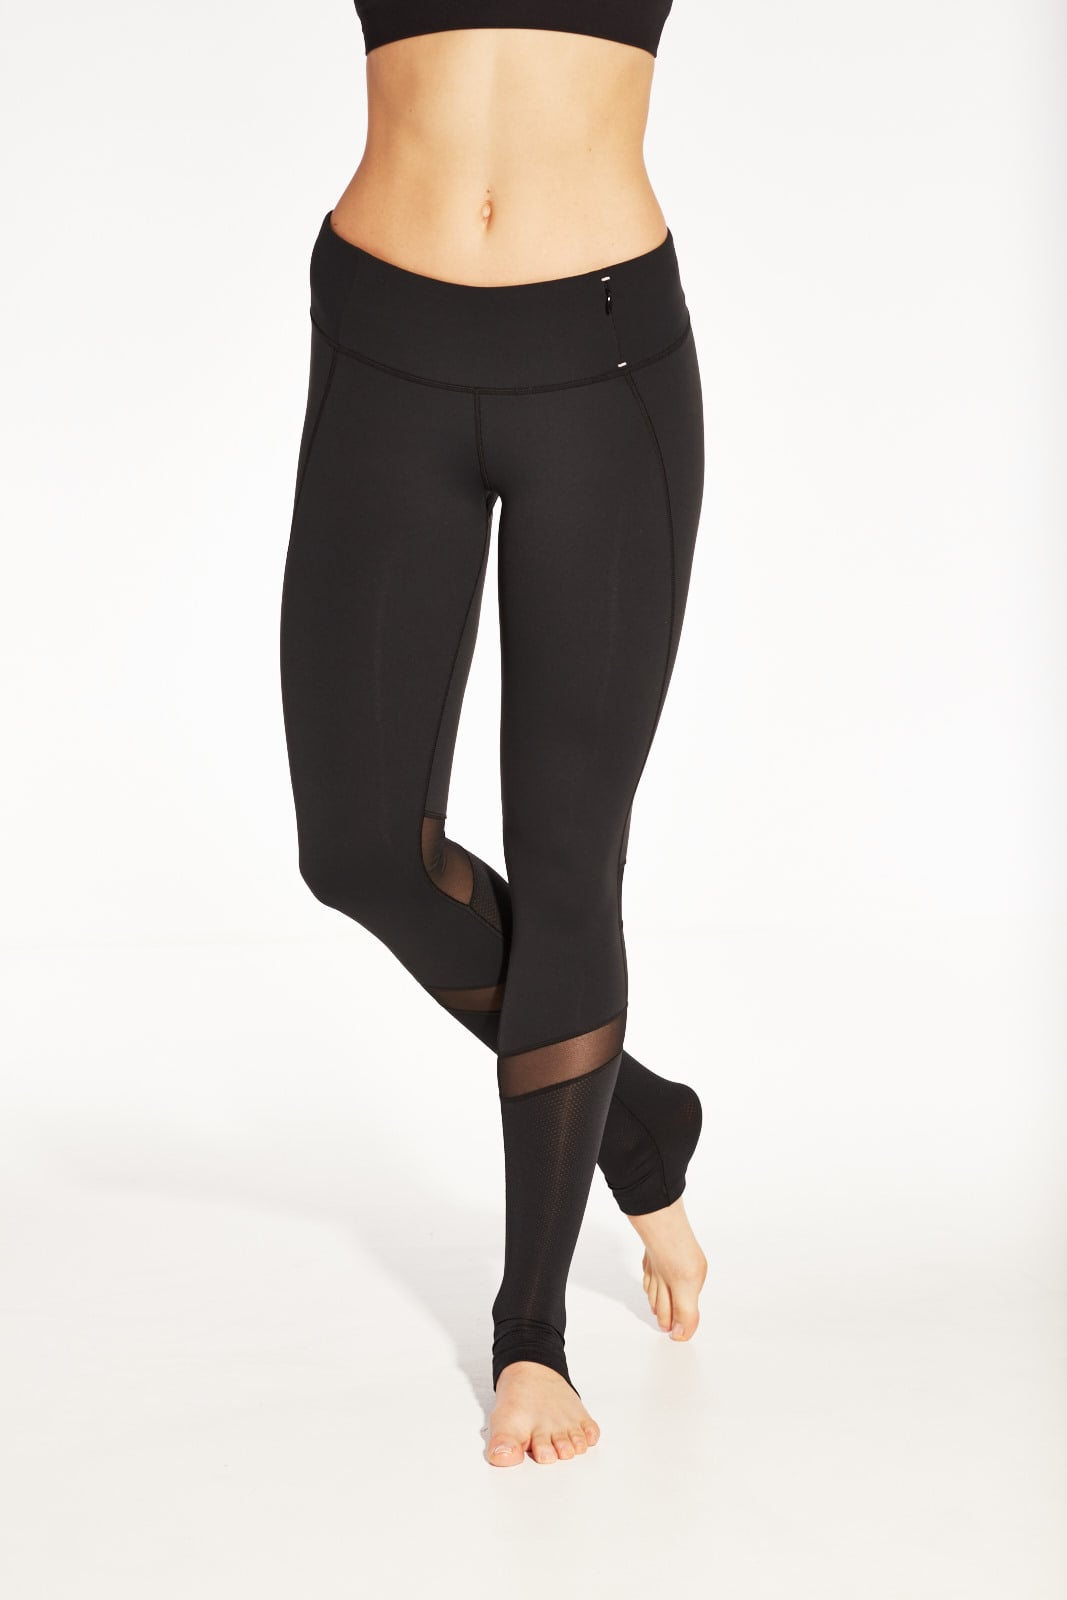 CALIA by Carrie Underwood Mesh Pieced Capris are soft, supportive